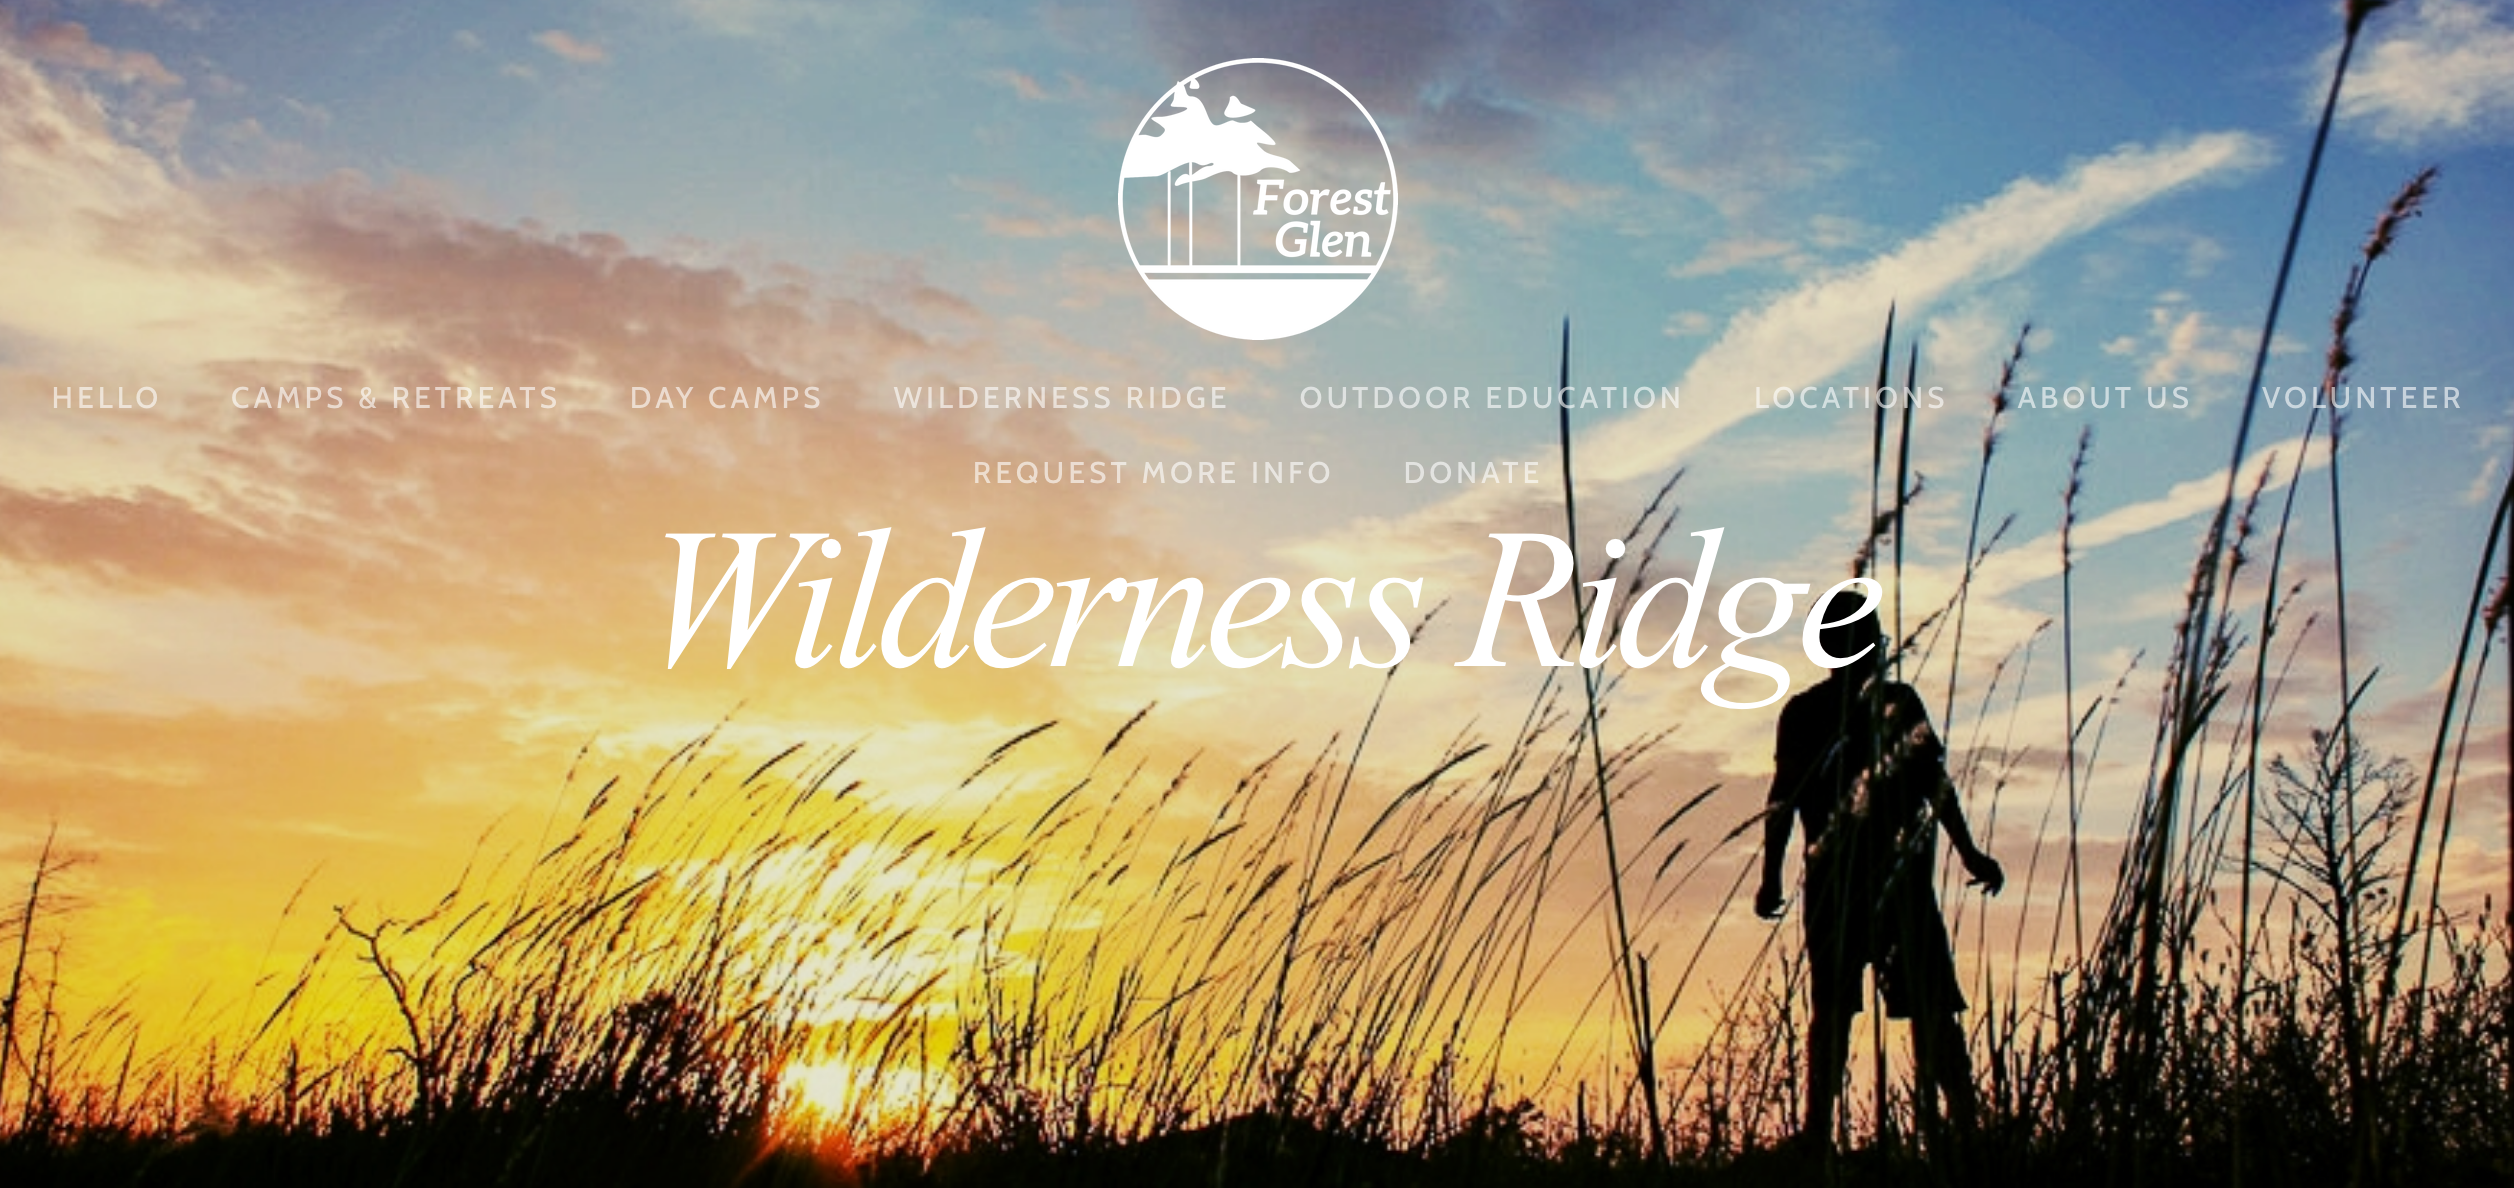 Wilderness Ridge banner with silouette of person against a sunset sky